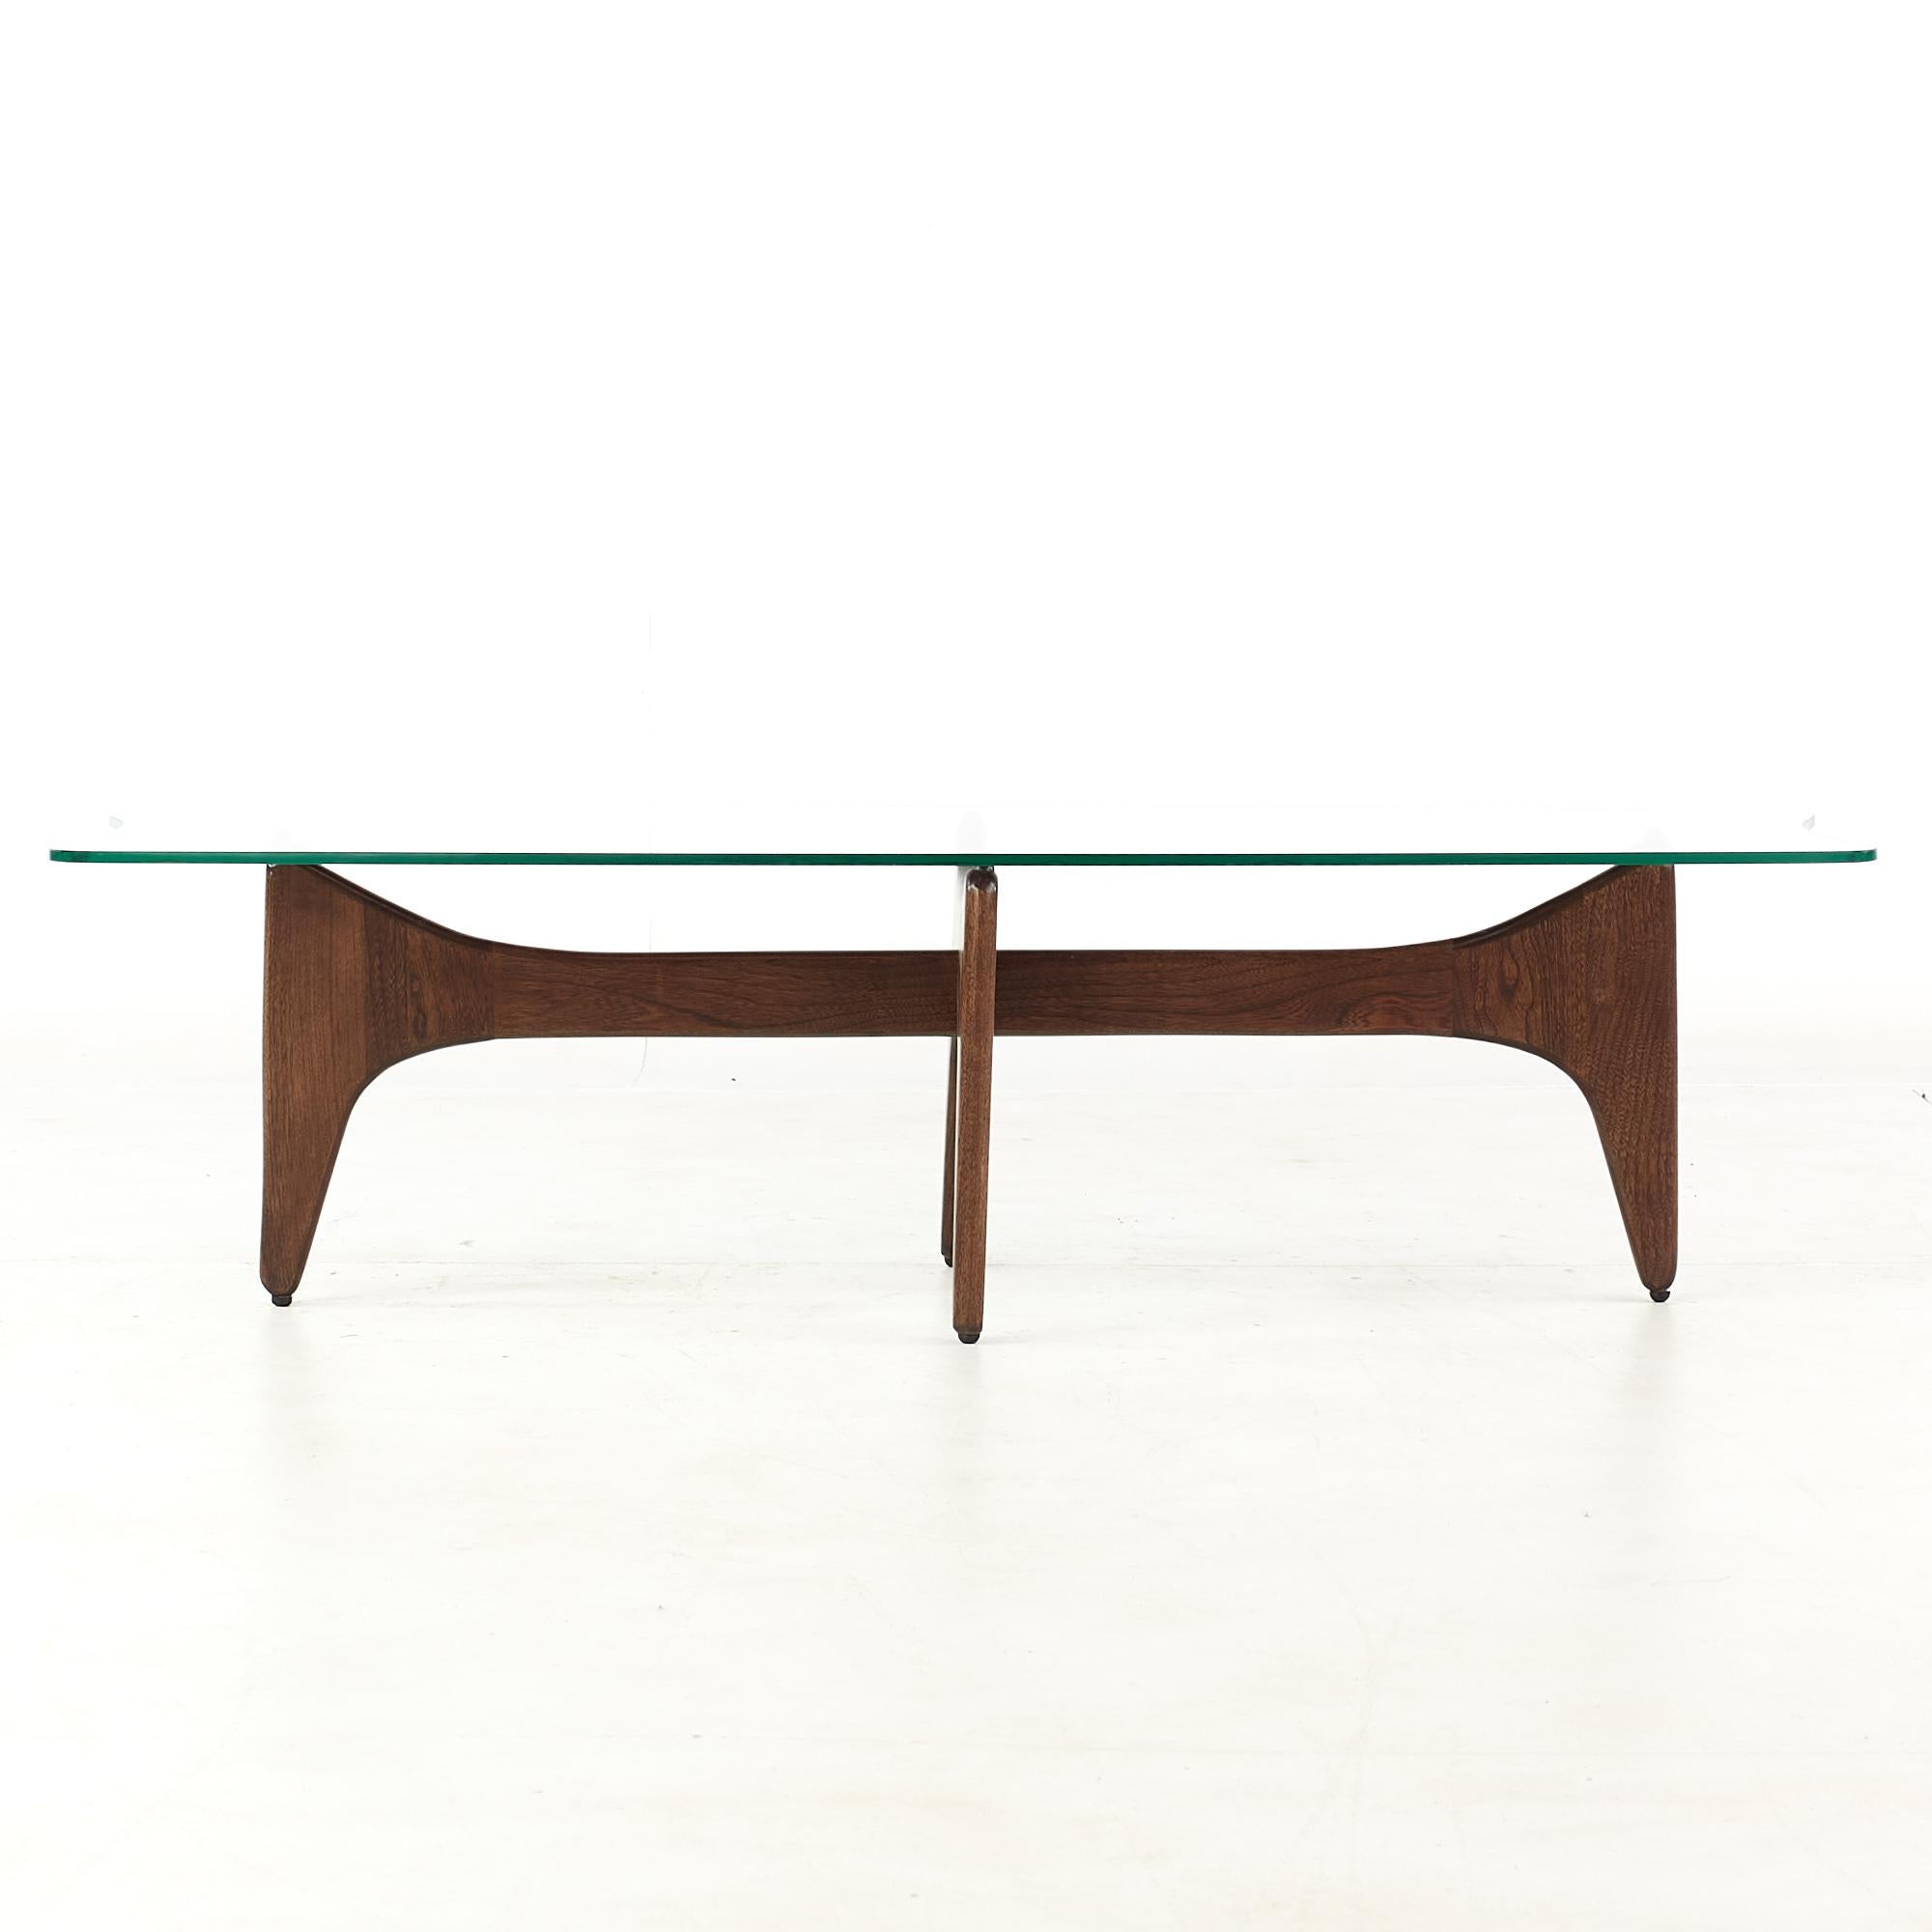 Adrian Pearsall mid century stingray coffee table

This table measures: 59.75 wide x 19.75 deep x 16.25 inches high

All pieces of furniture can be had in what we call restored vintage condition. That means the piece is restored upon purchase so